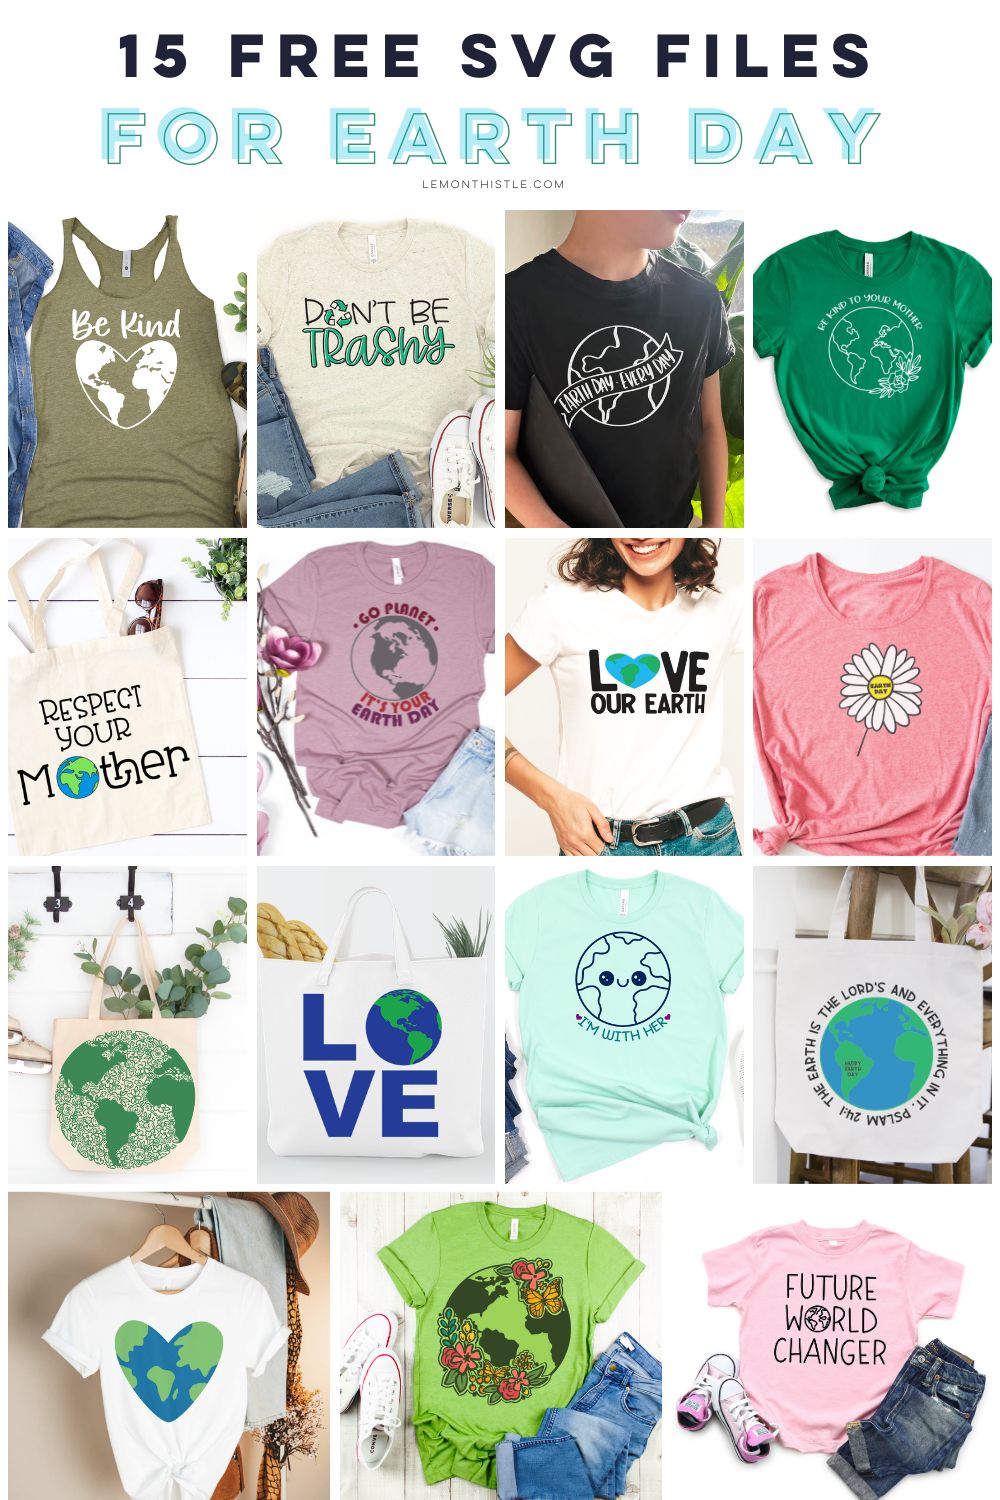 Free Earth Day Cut Files-15 designs on tee shirts and tote bags!